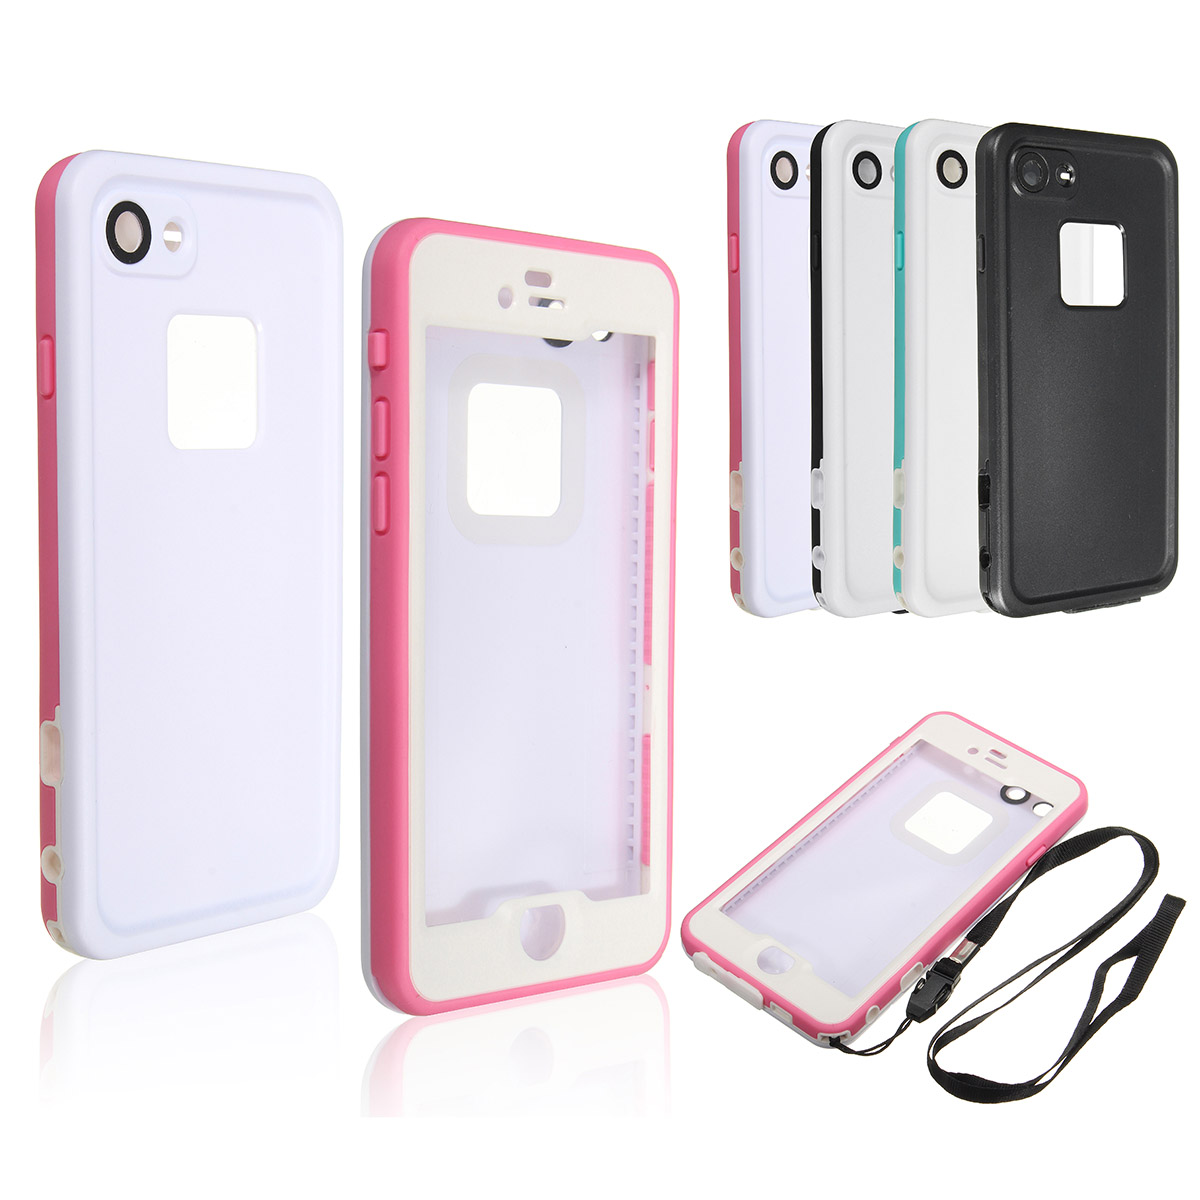 Waterproof-Dust-Shock-Snow-Proof-Touchable-Case-Cover-For-Apple-iPhone-7-1093302-7